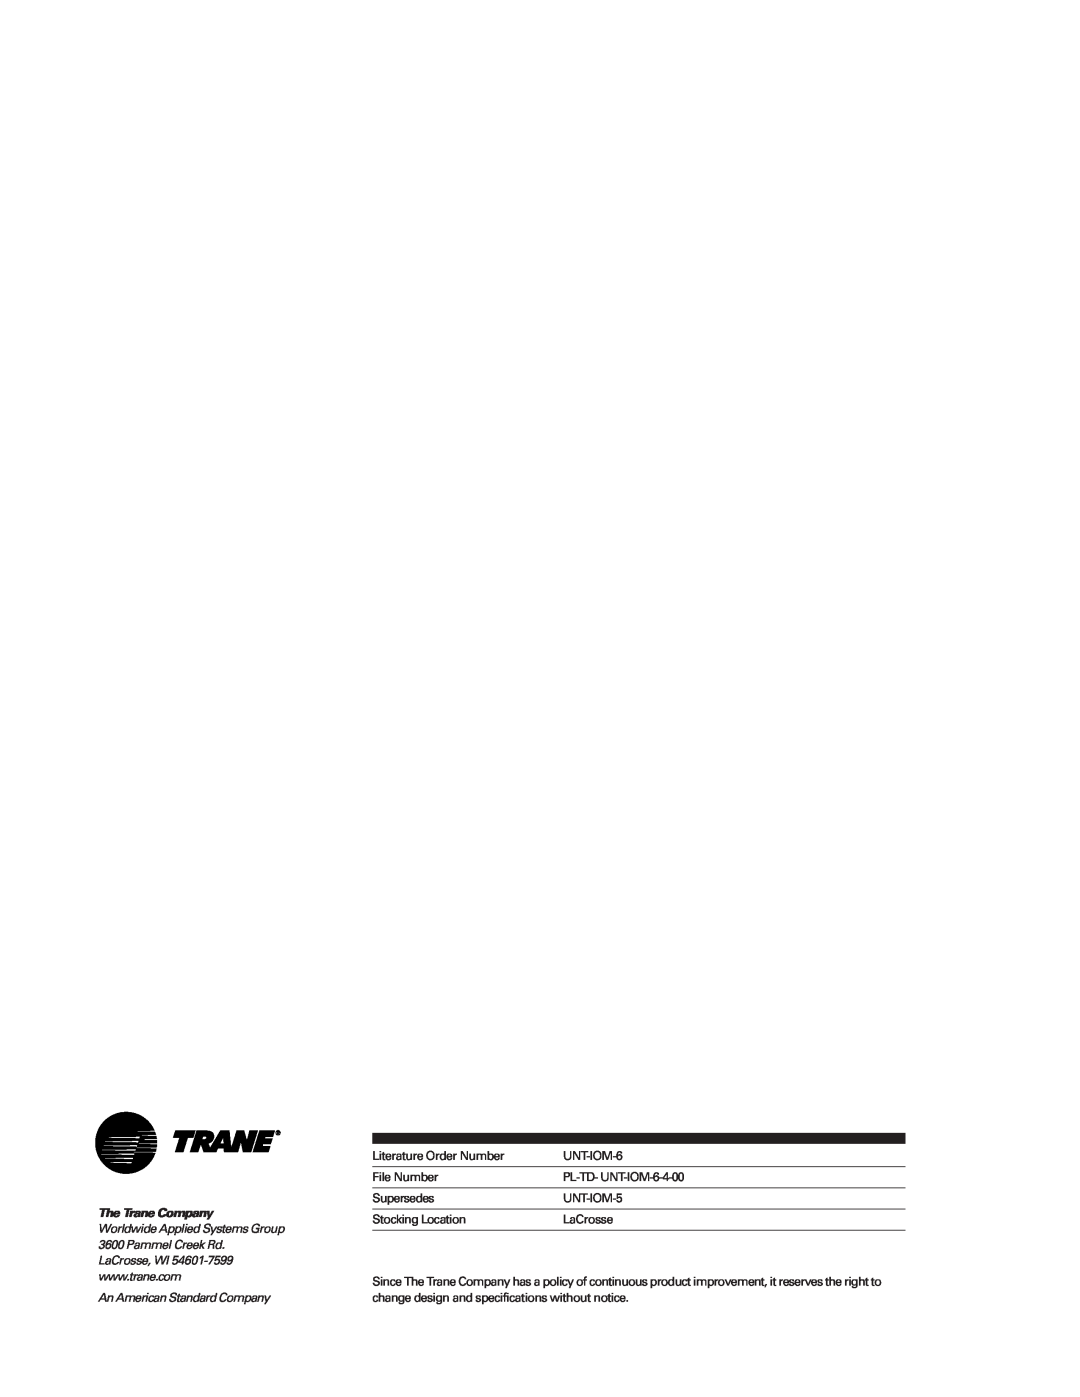 Trane LO The Trane Company, An American Standard Company, Literature Order Number, UNT-IOM-6, File Number, Supersedes 